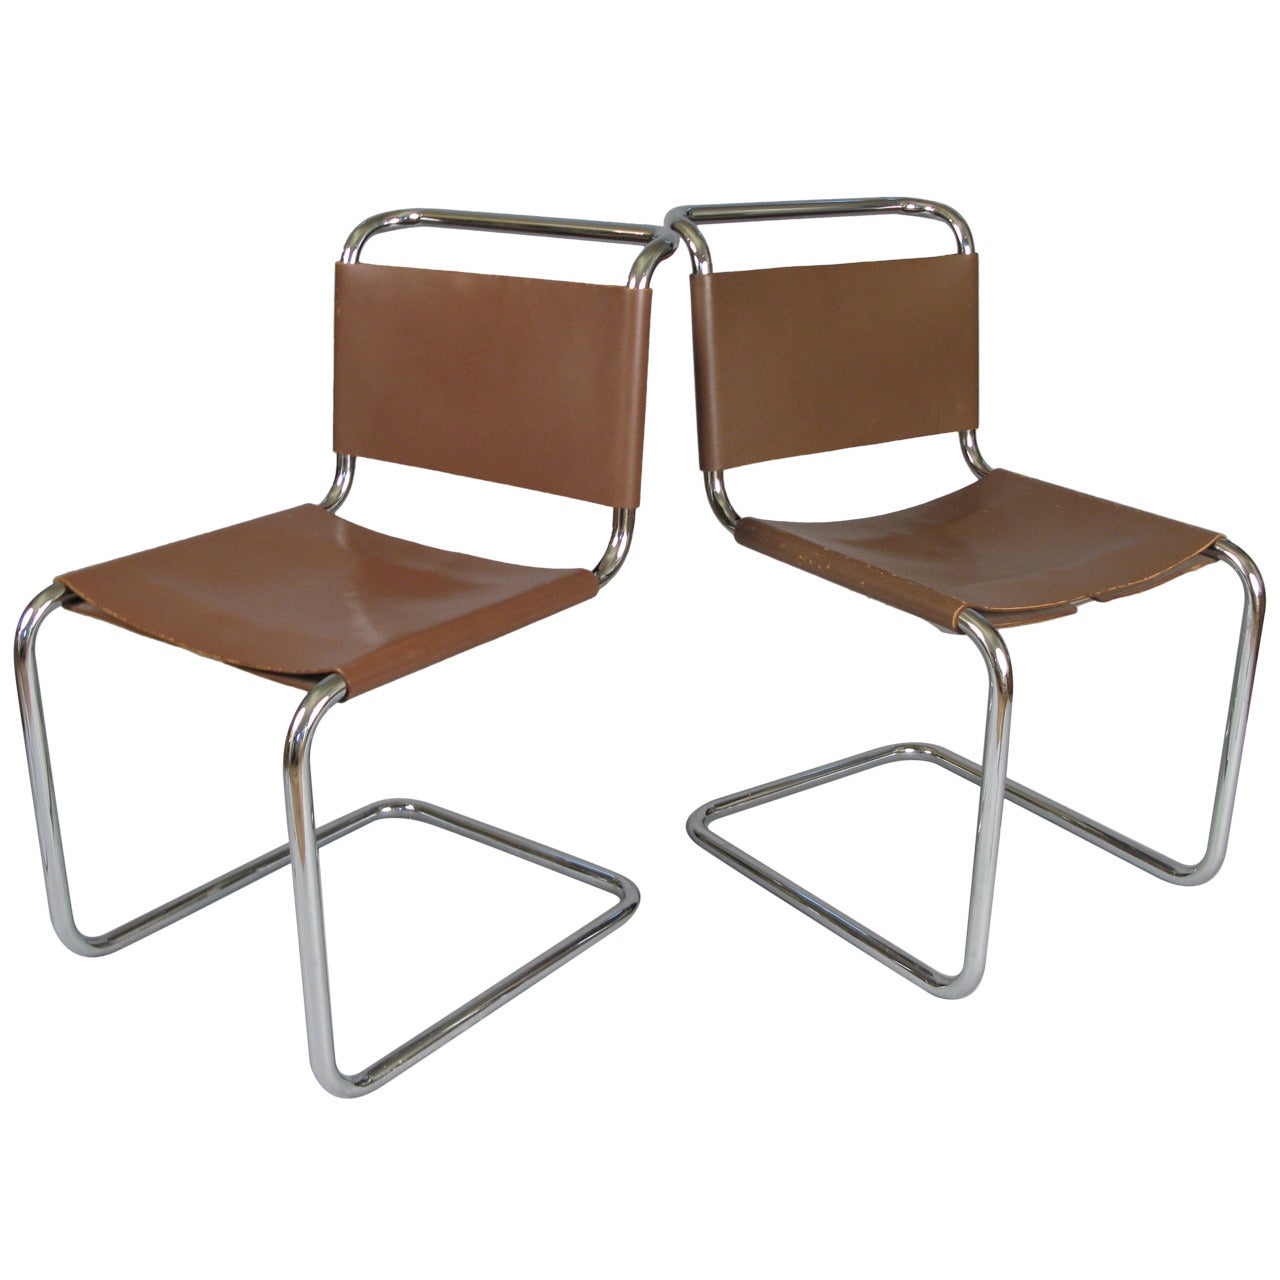 Pair of 1950s Italian Chrome and Leather Chairs